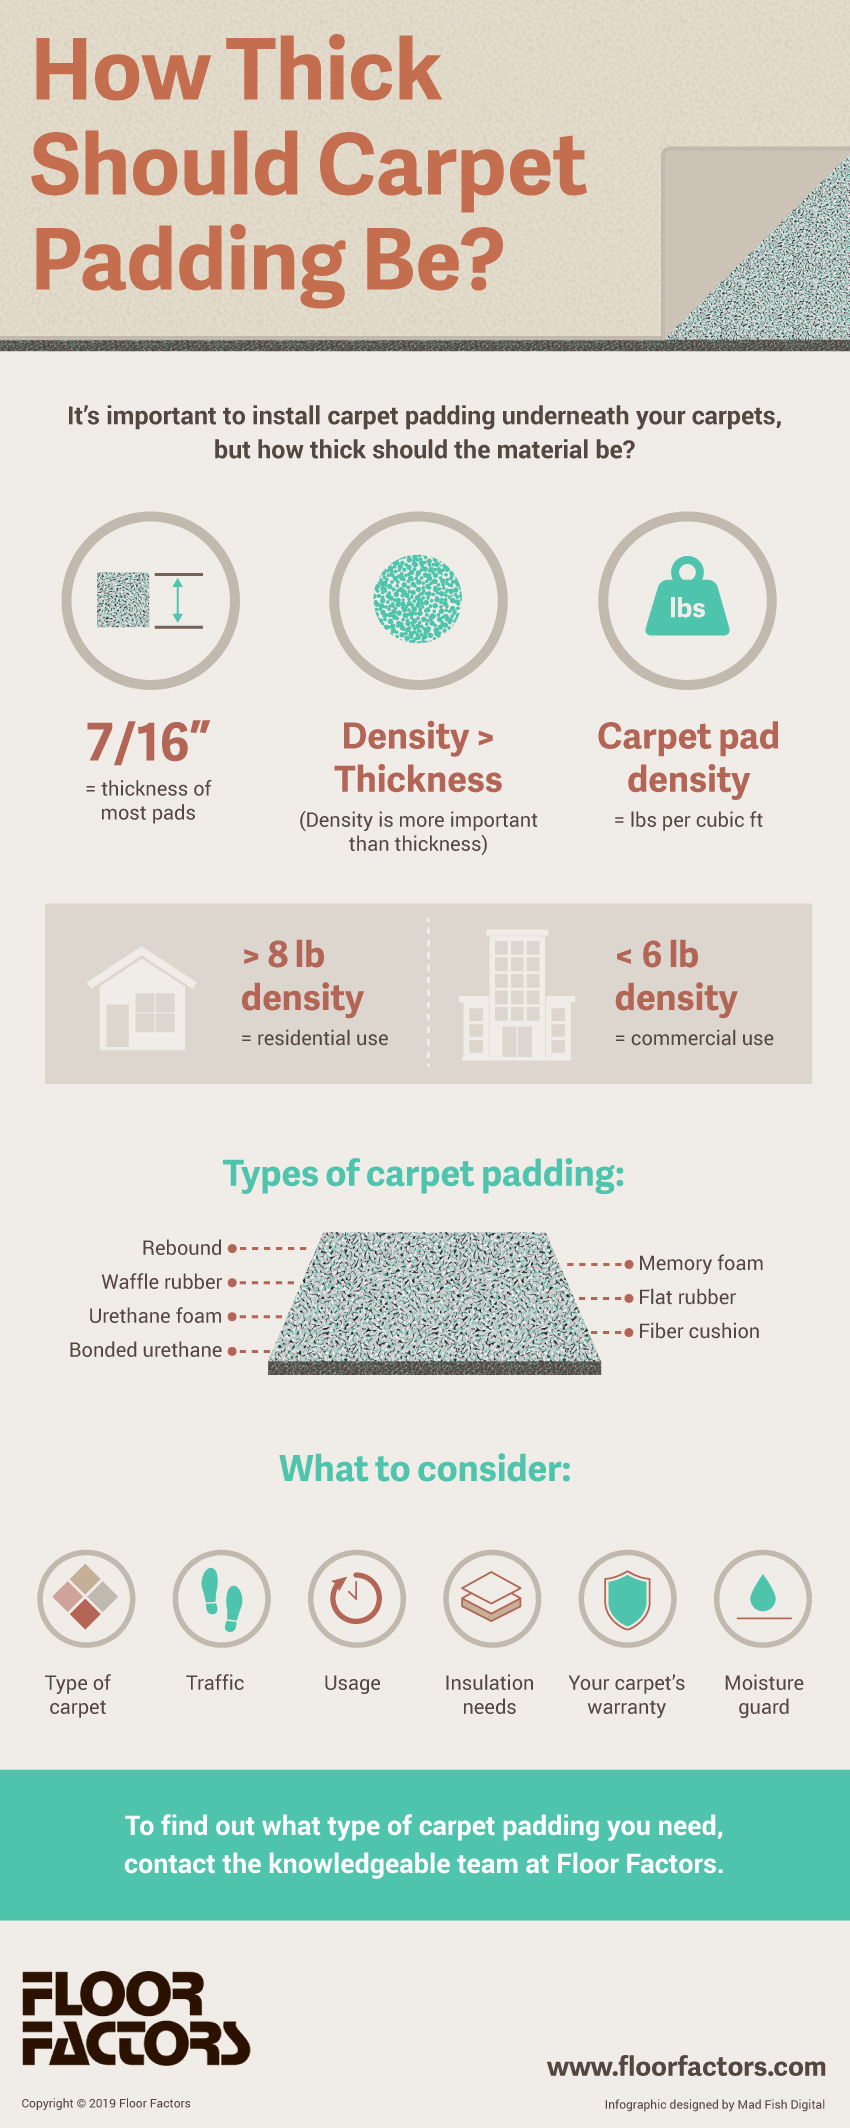 The Importance of Carpet Cushion - The Carpet and Rug Institute